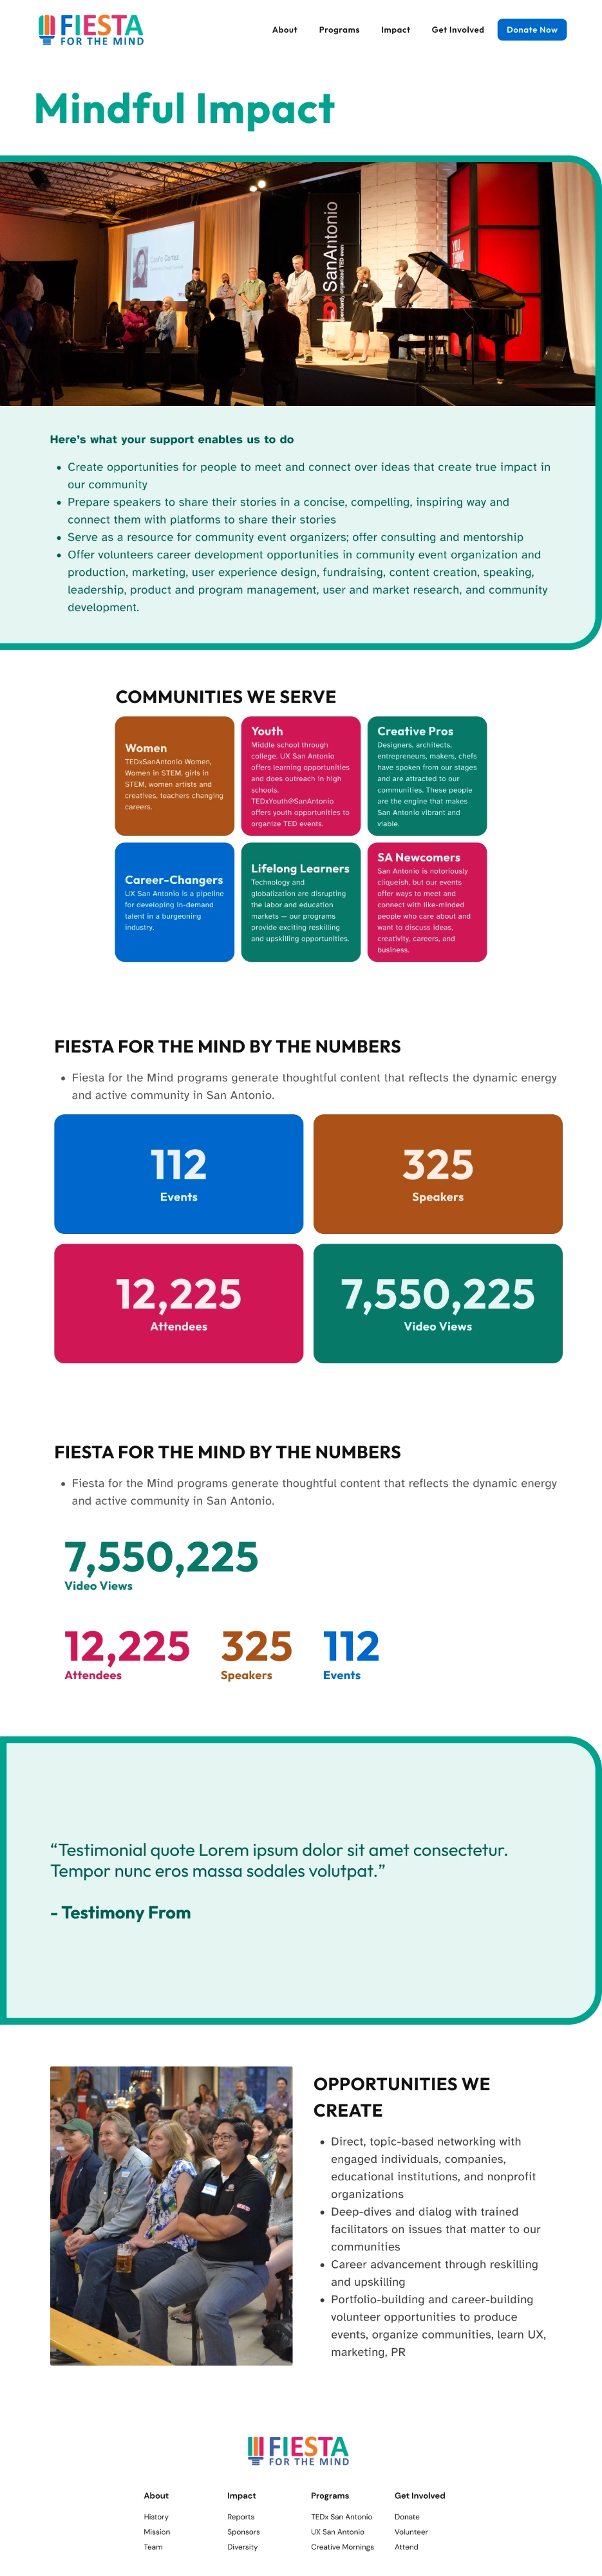 Mindful Impact page mockup, containing colorful sections for communities served, notable numbers, and opportunities they create